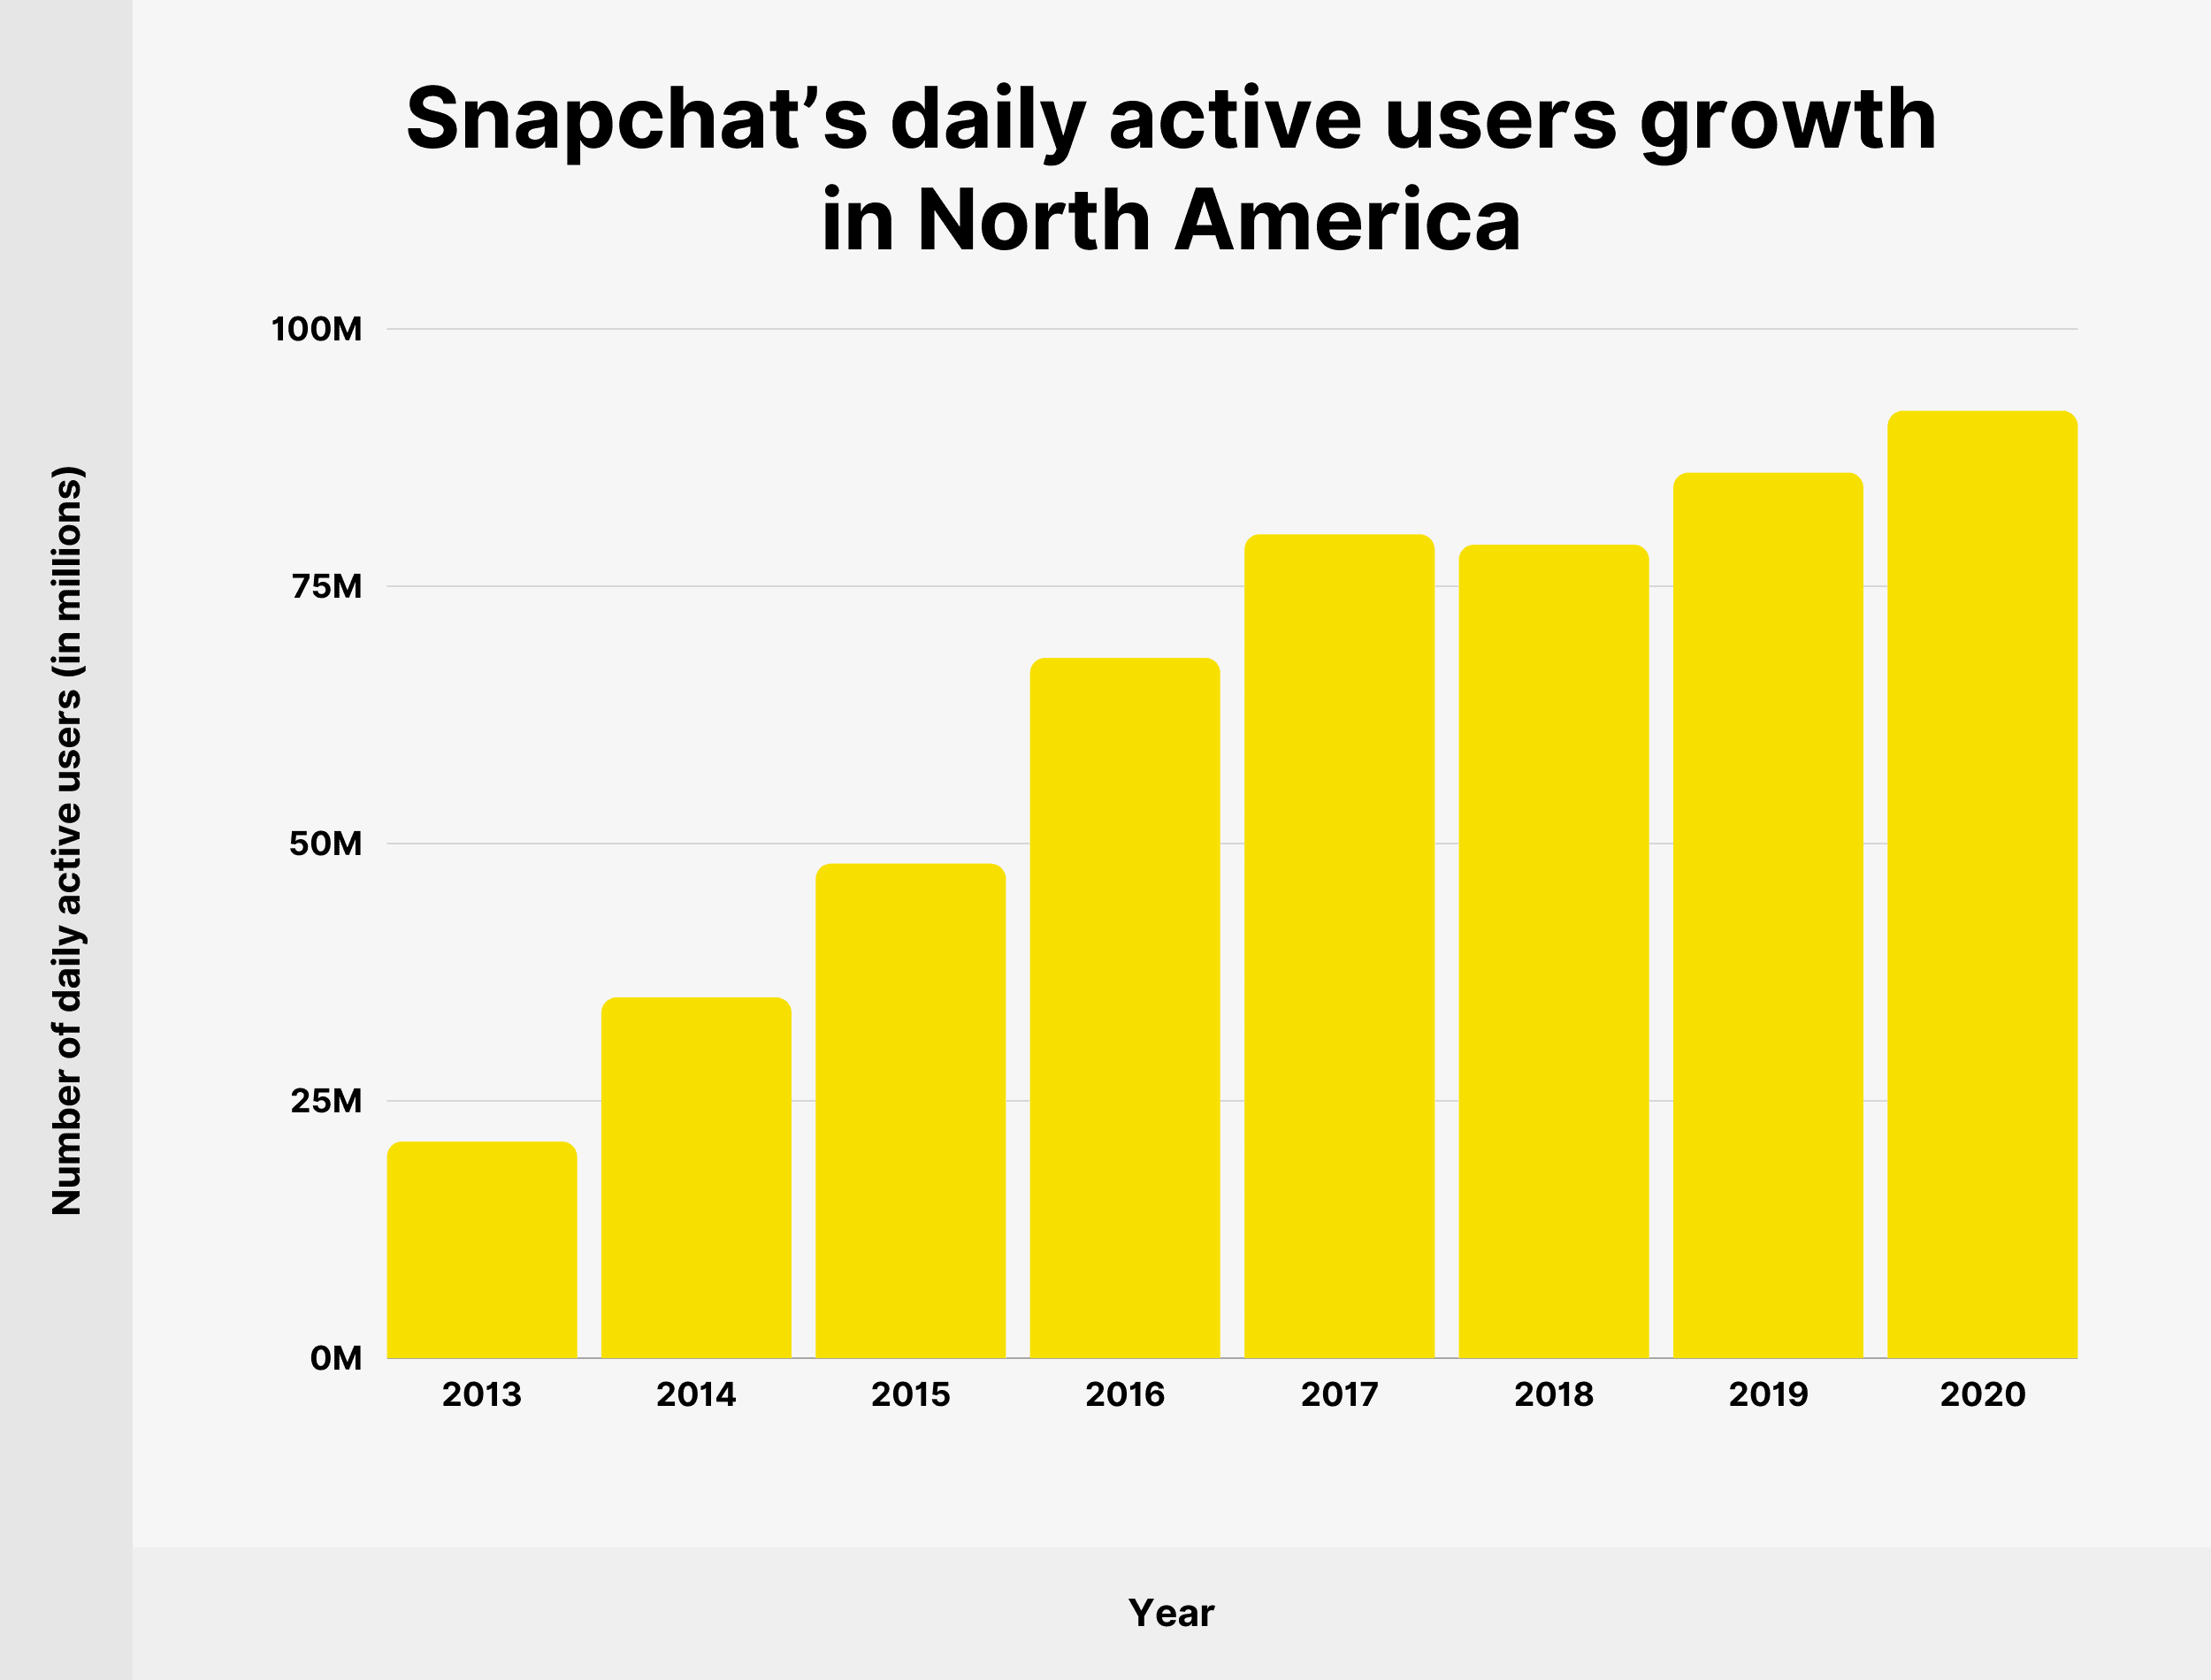 Snapchat’s daily active users growth in North America